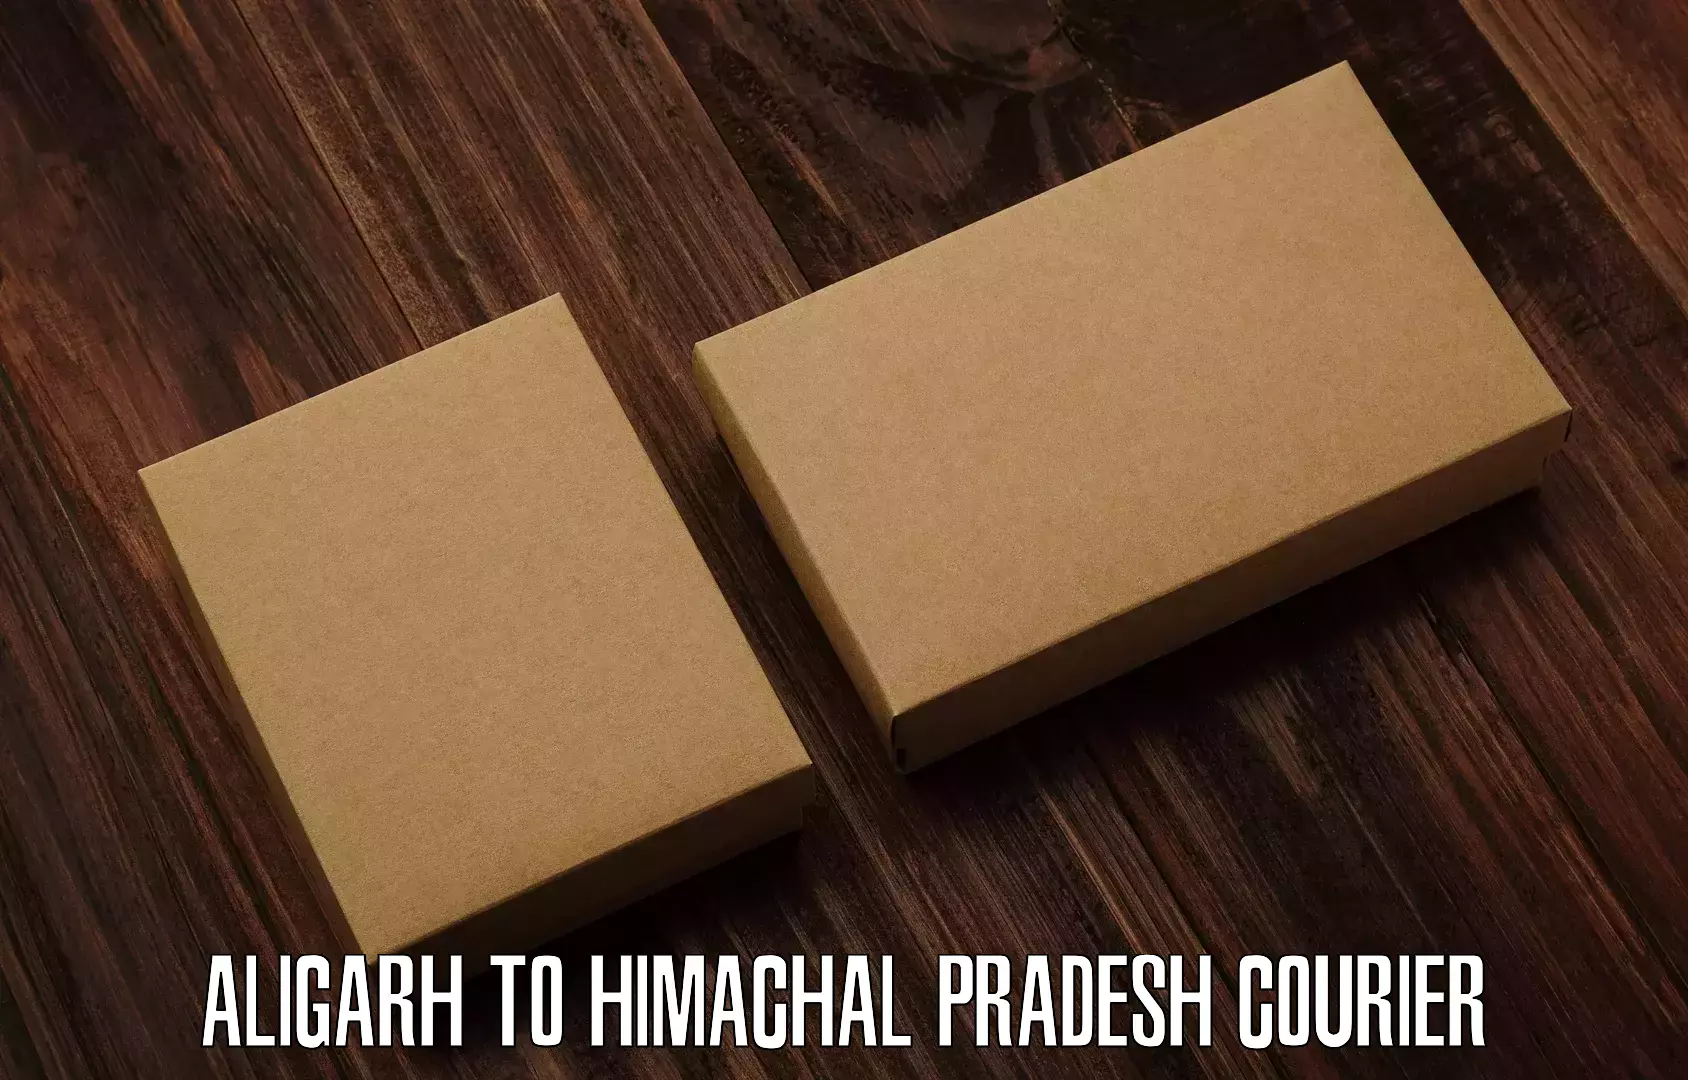 Global courier networks Aligarh to Himachal Pradesh